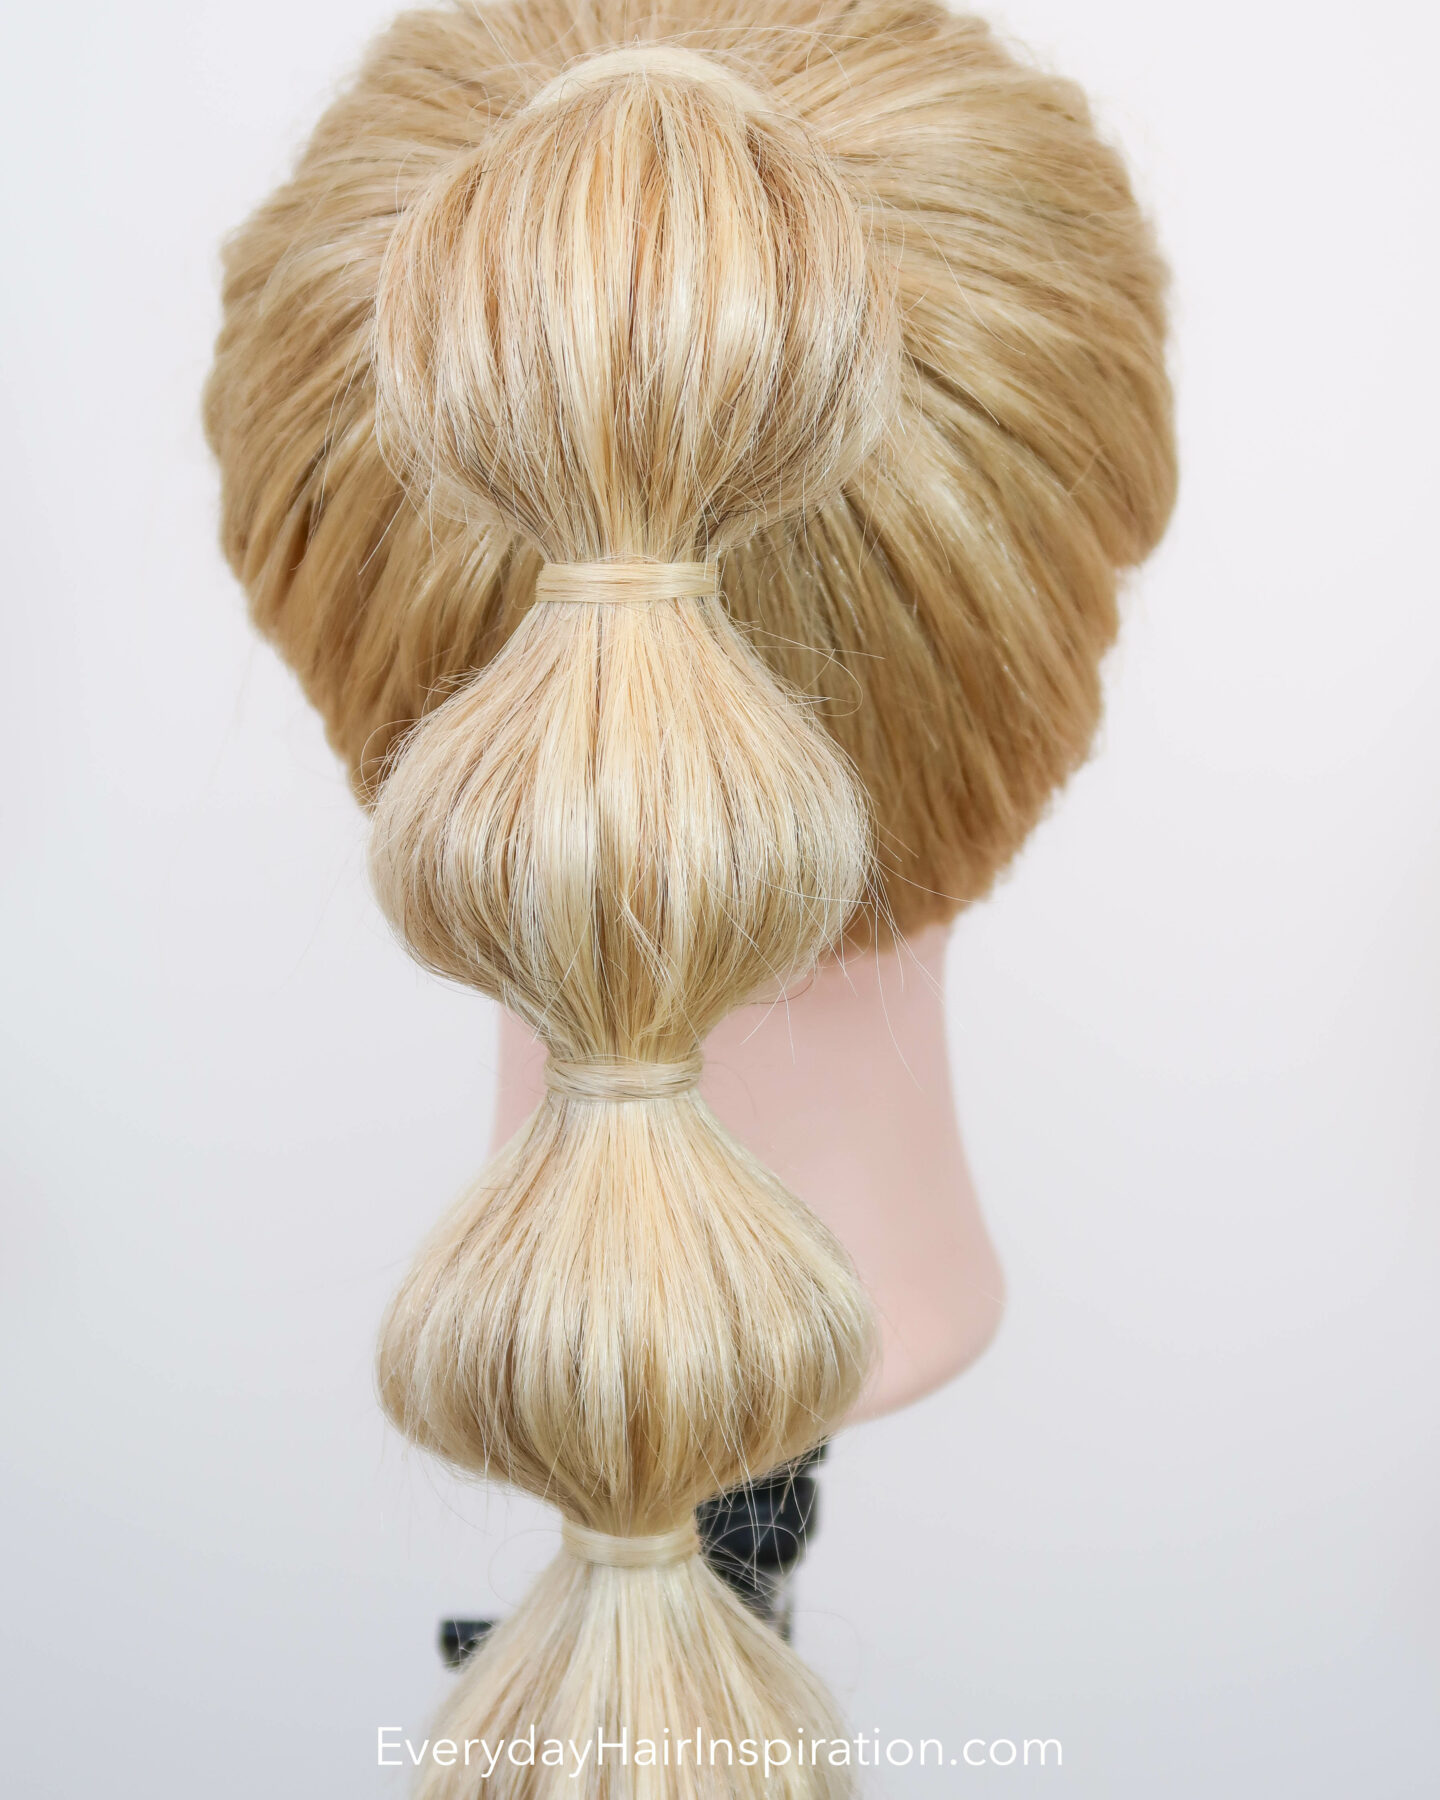 Blonde hairdresser doll, seen from the back with a high ponytail with a bubble braid down the hair. Closeup. 